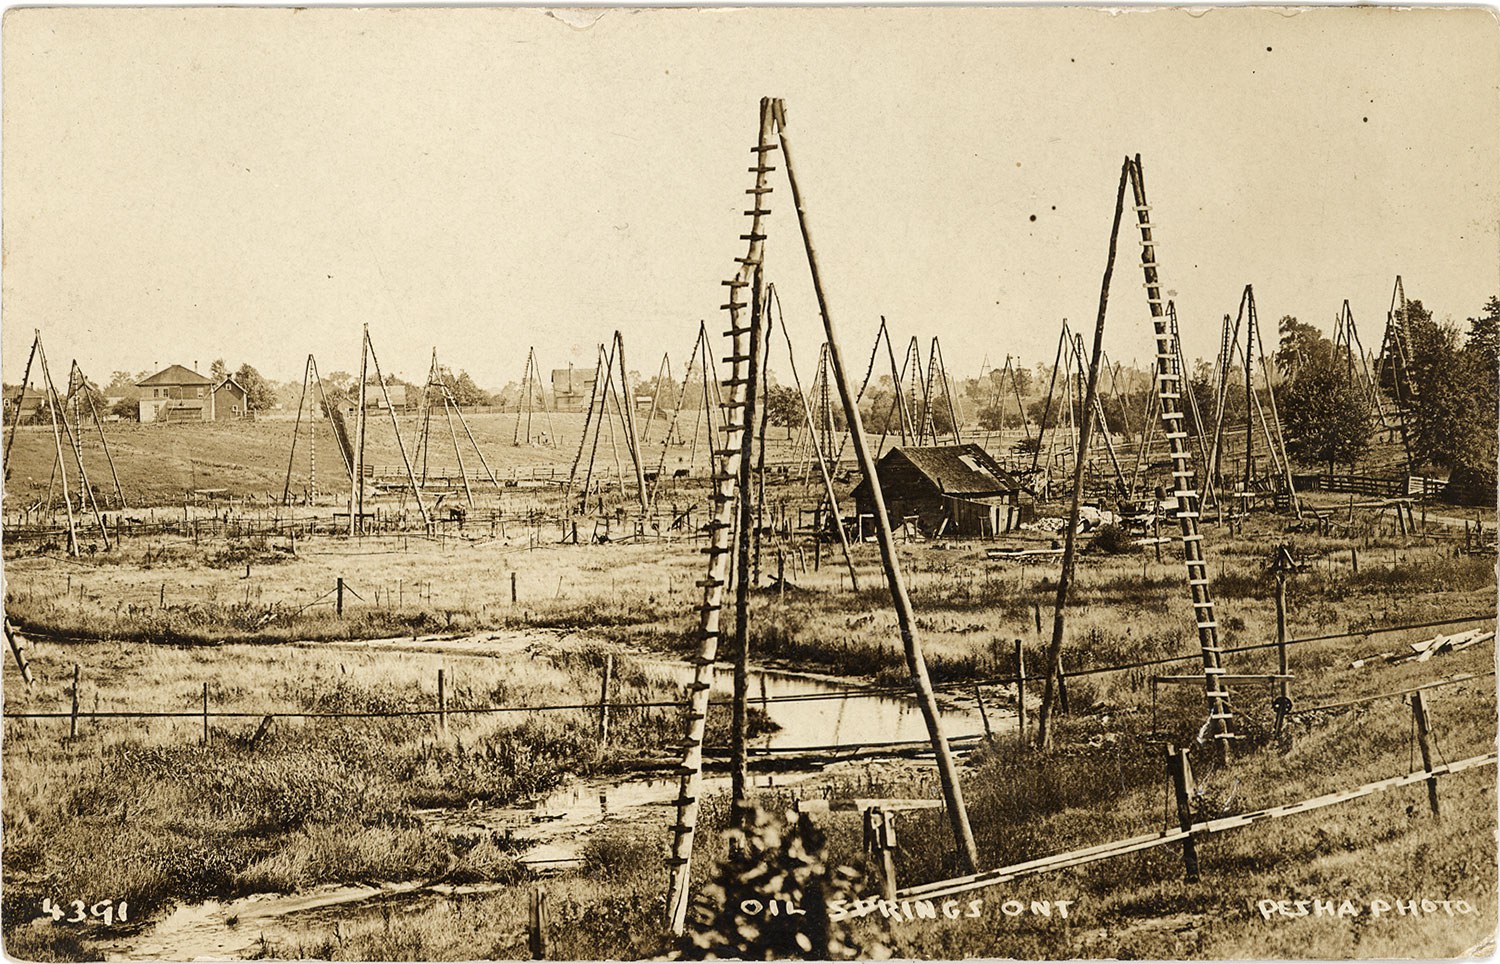 A view of some of the 1,100 three-pole derricks used at Oil Springs around 1910